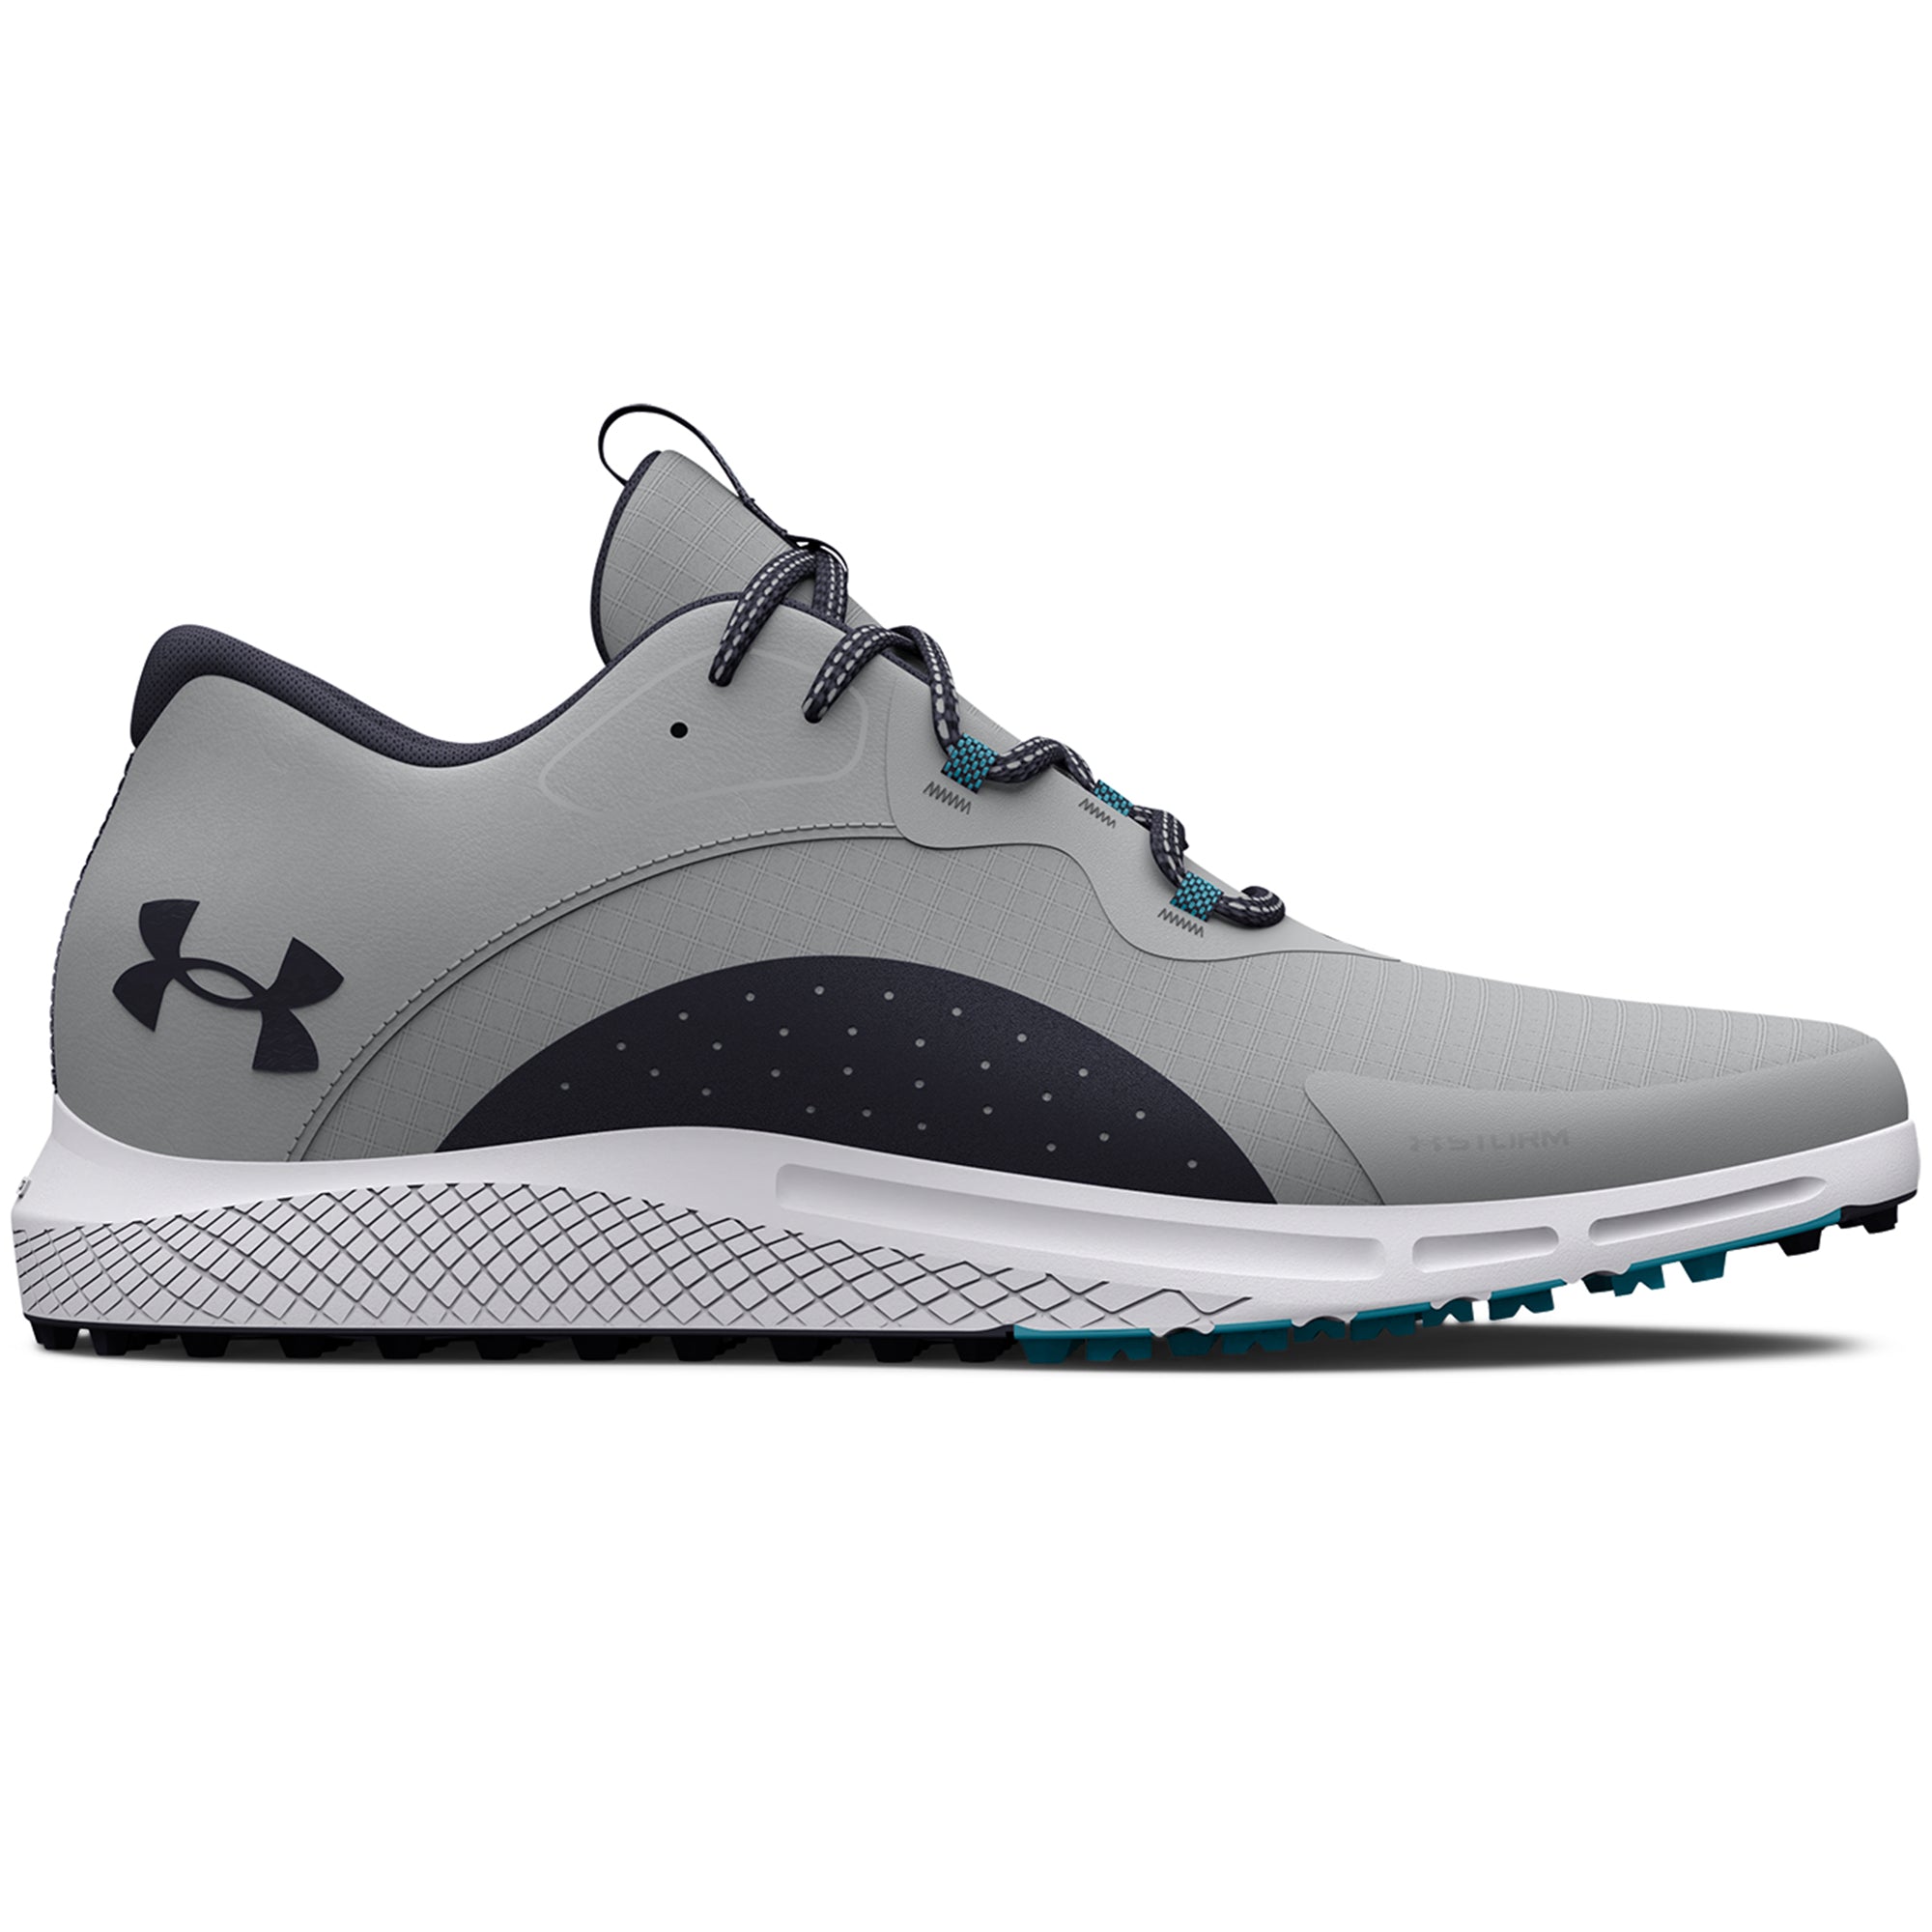 Under Armour Charged Draw 2 SL Golf Shoes 3026399 Mod Grey Midnight ...